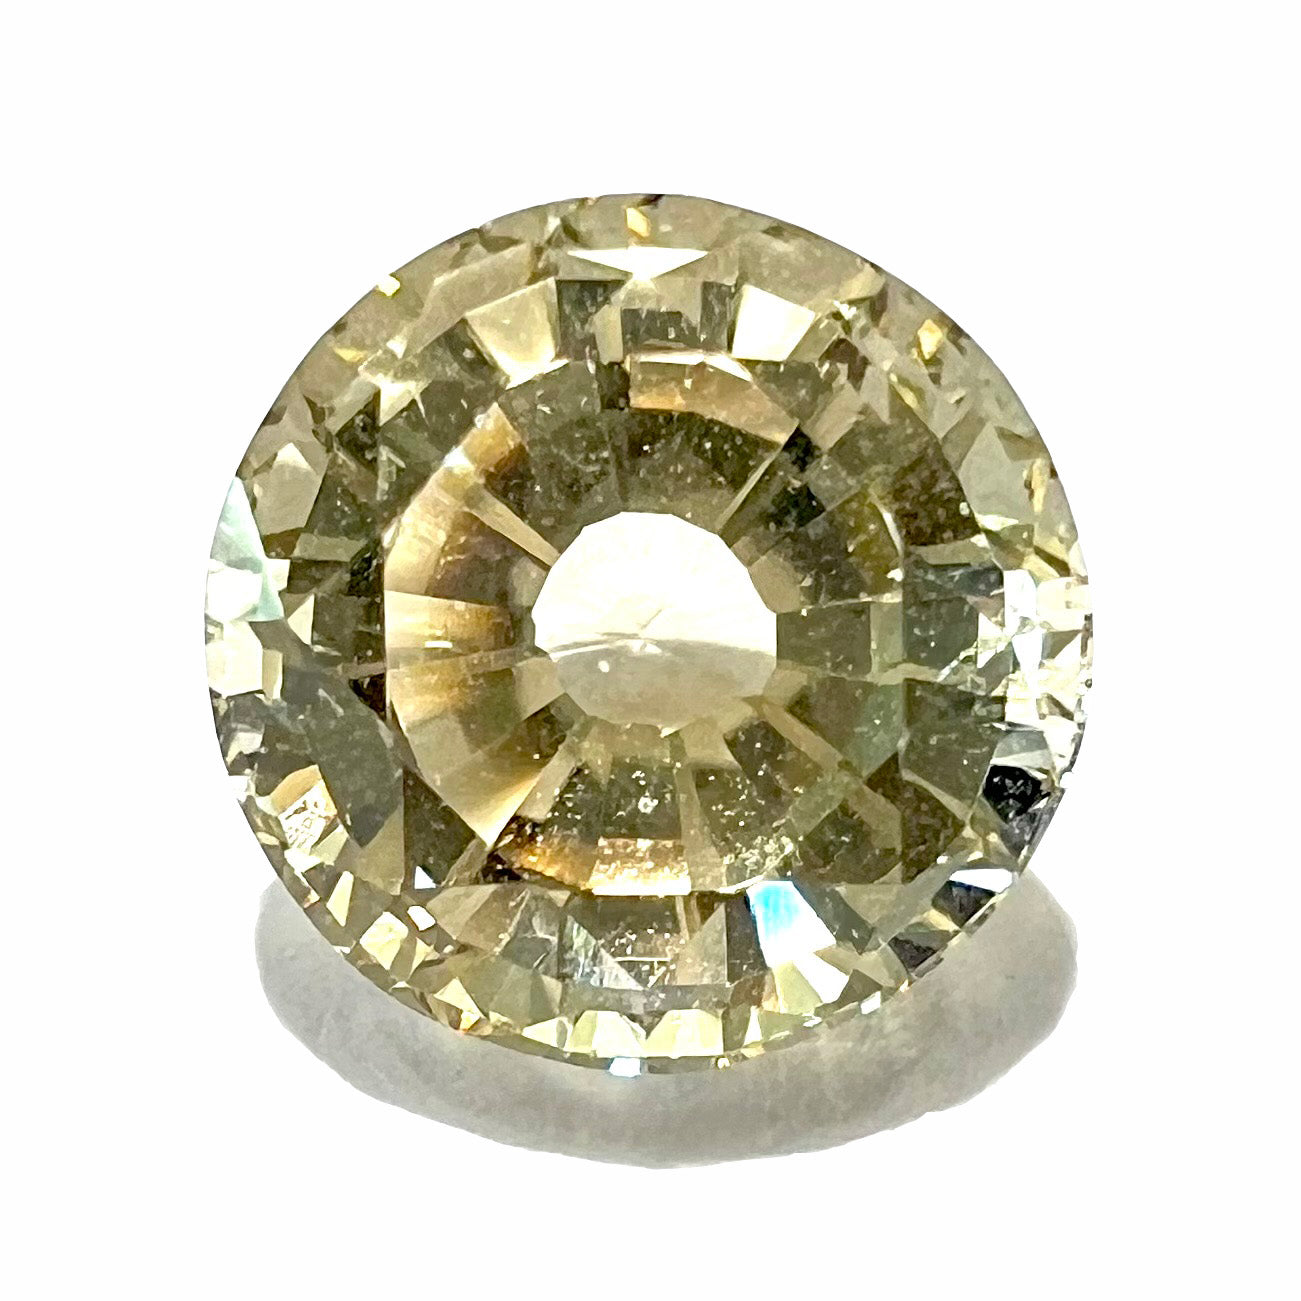 A loose, round brilliant cut citrine gemstone.  The stone is light yellow color and weighs 3.25 carats.